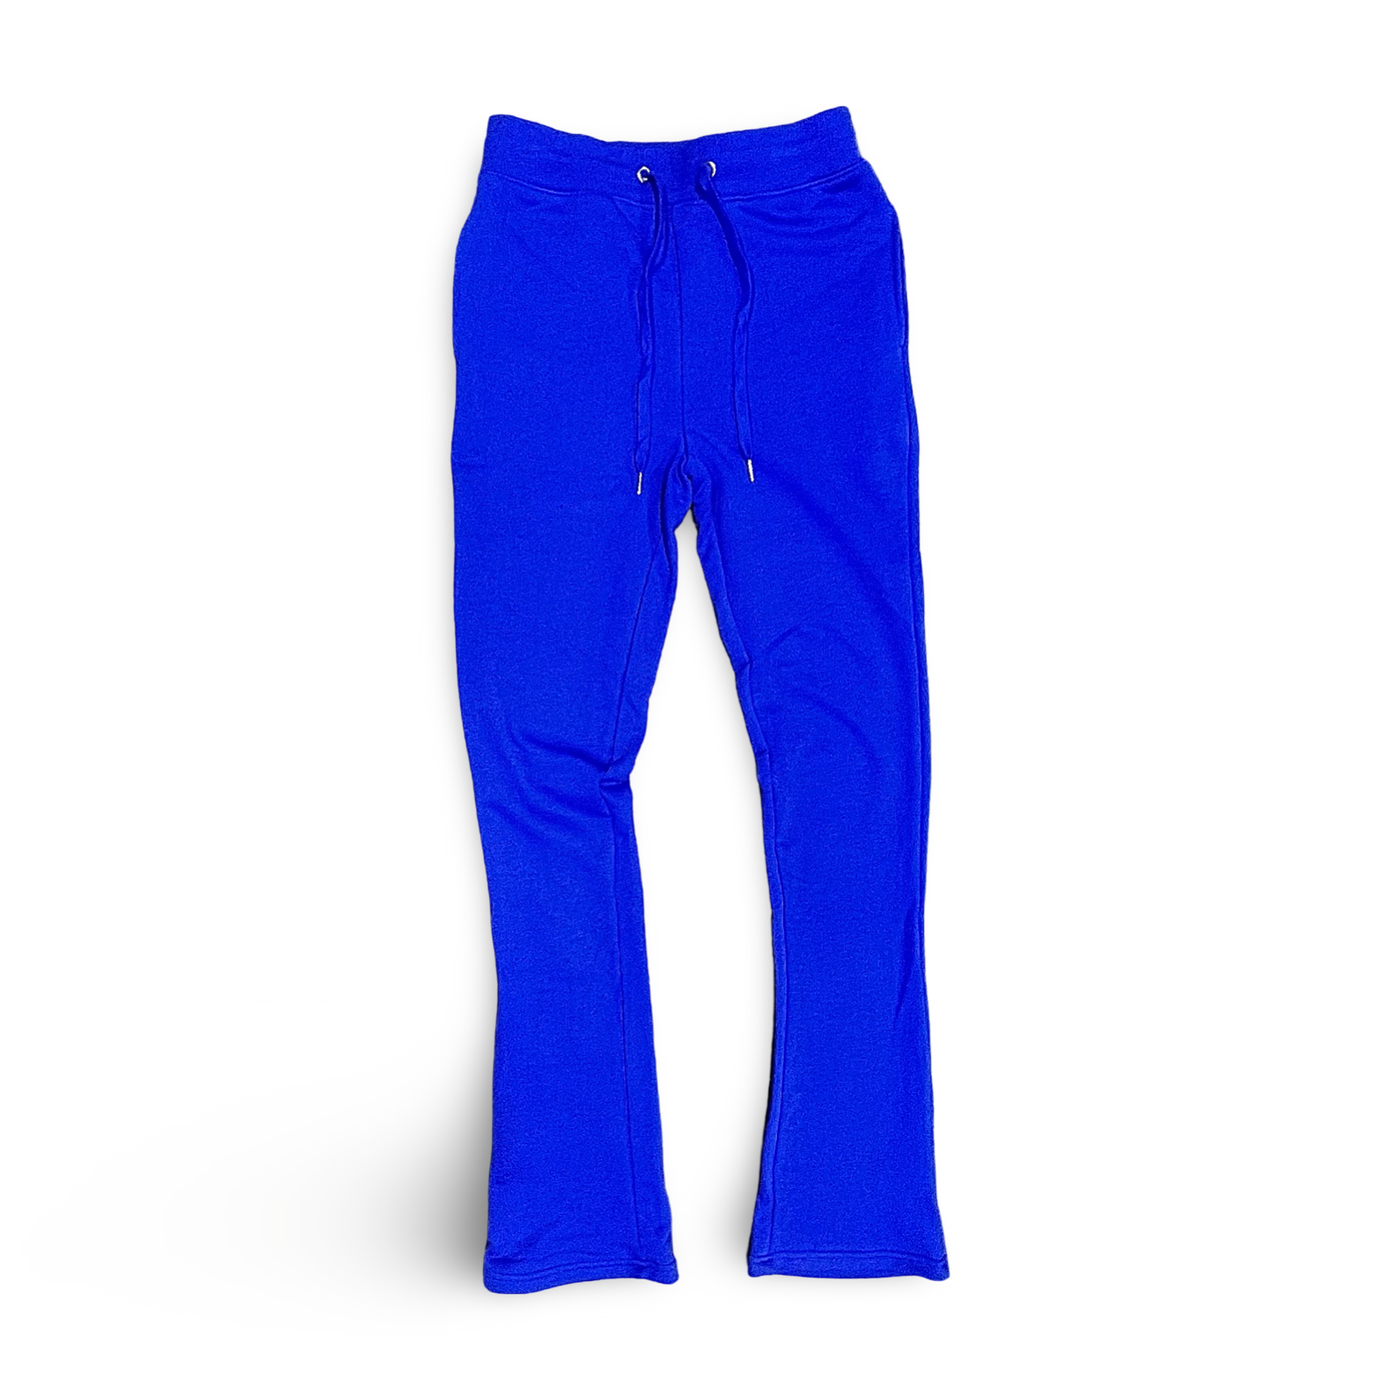 M5690 Armor Jeans Royal Mid Rise Stacked Fit Sweatpants